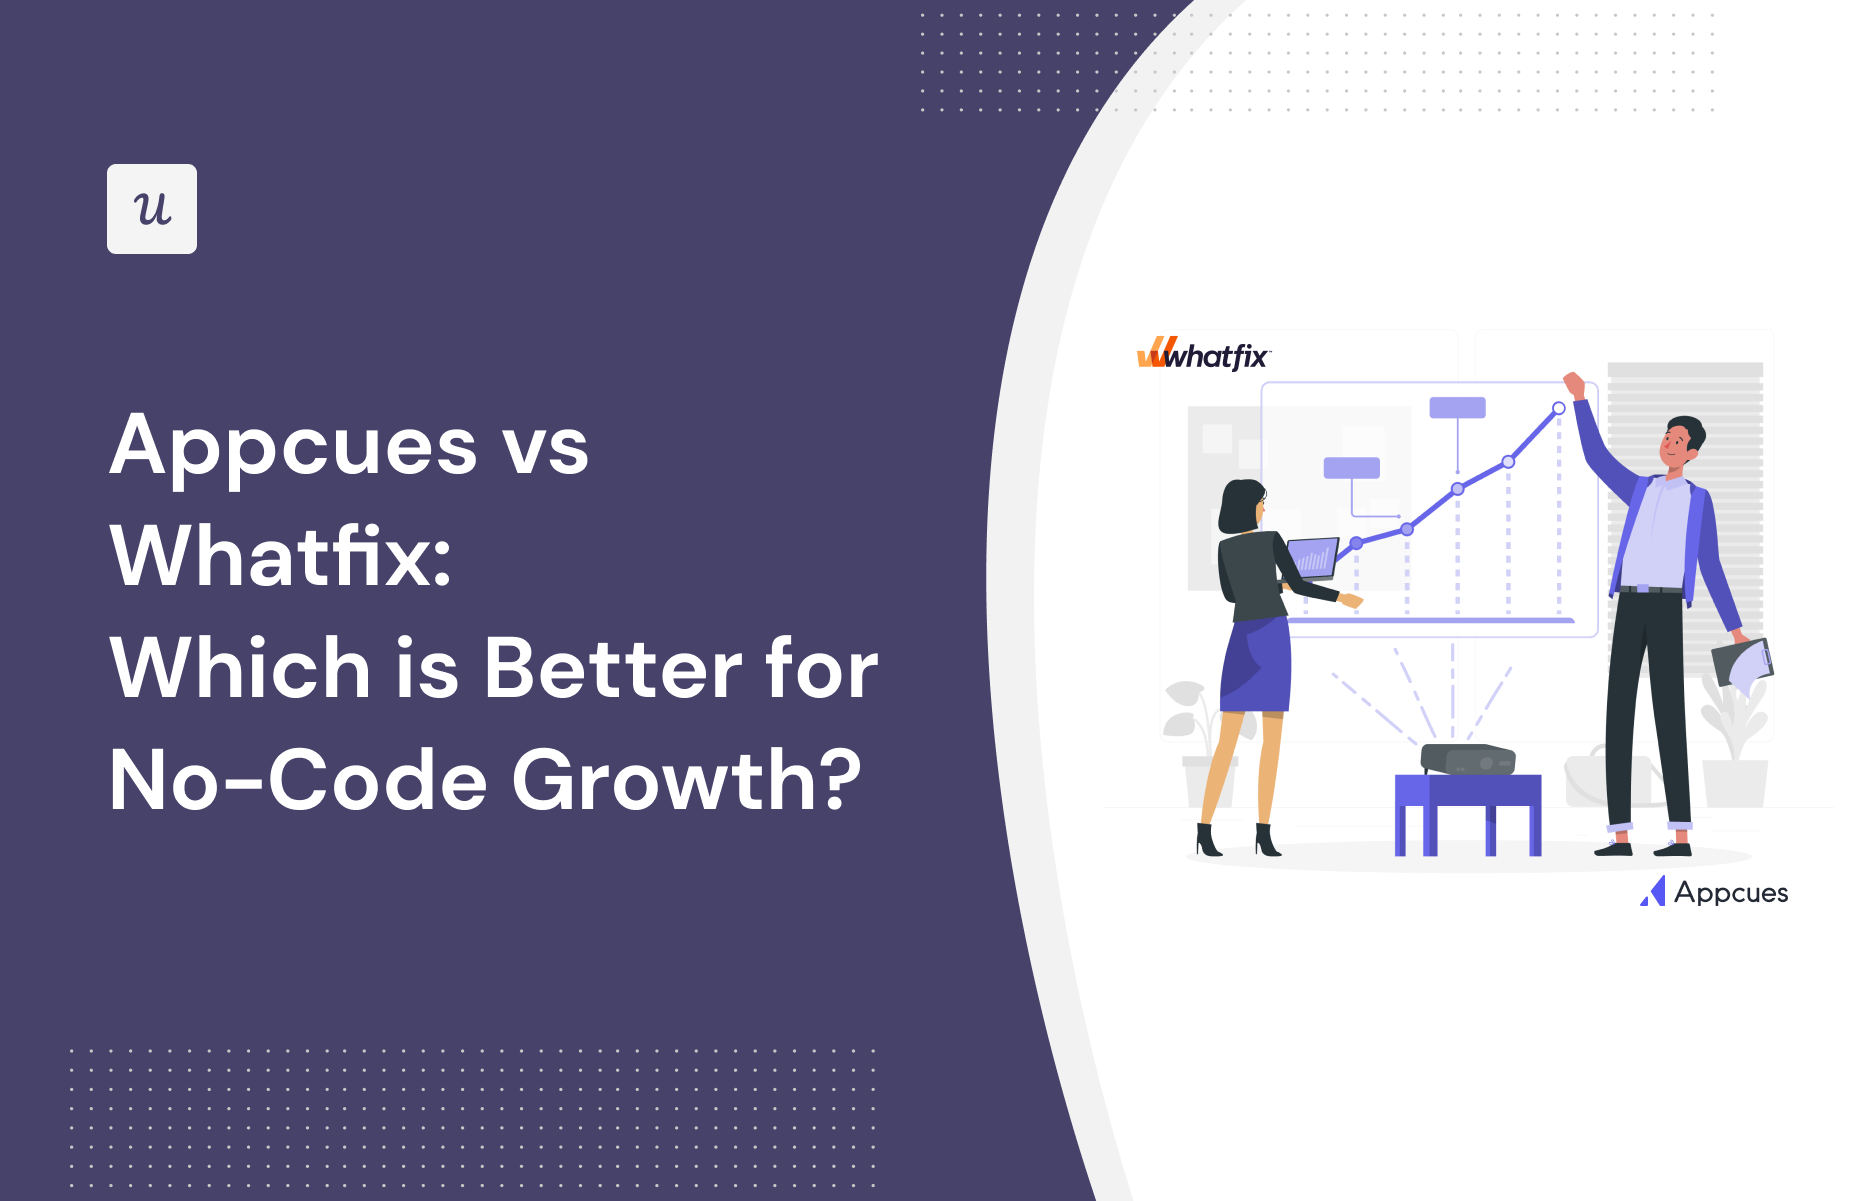 Appcues vs Whatfix: Which is Better for No-Code Growth?